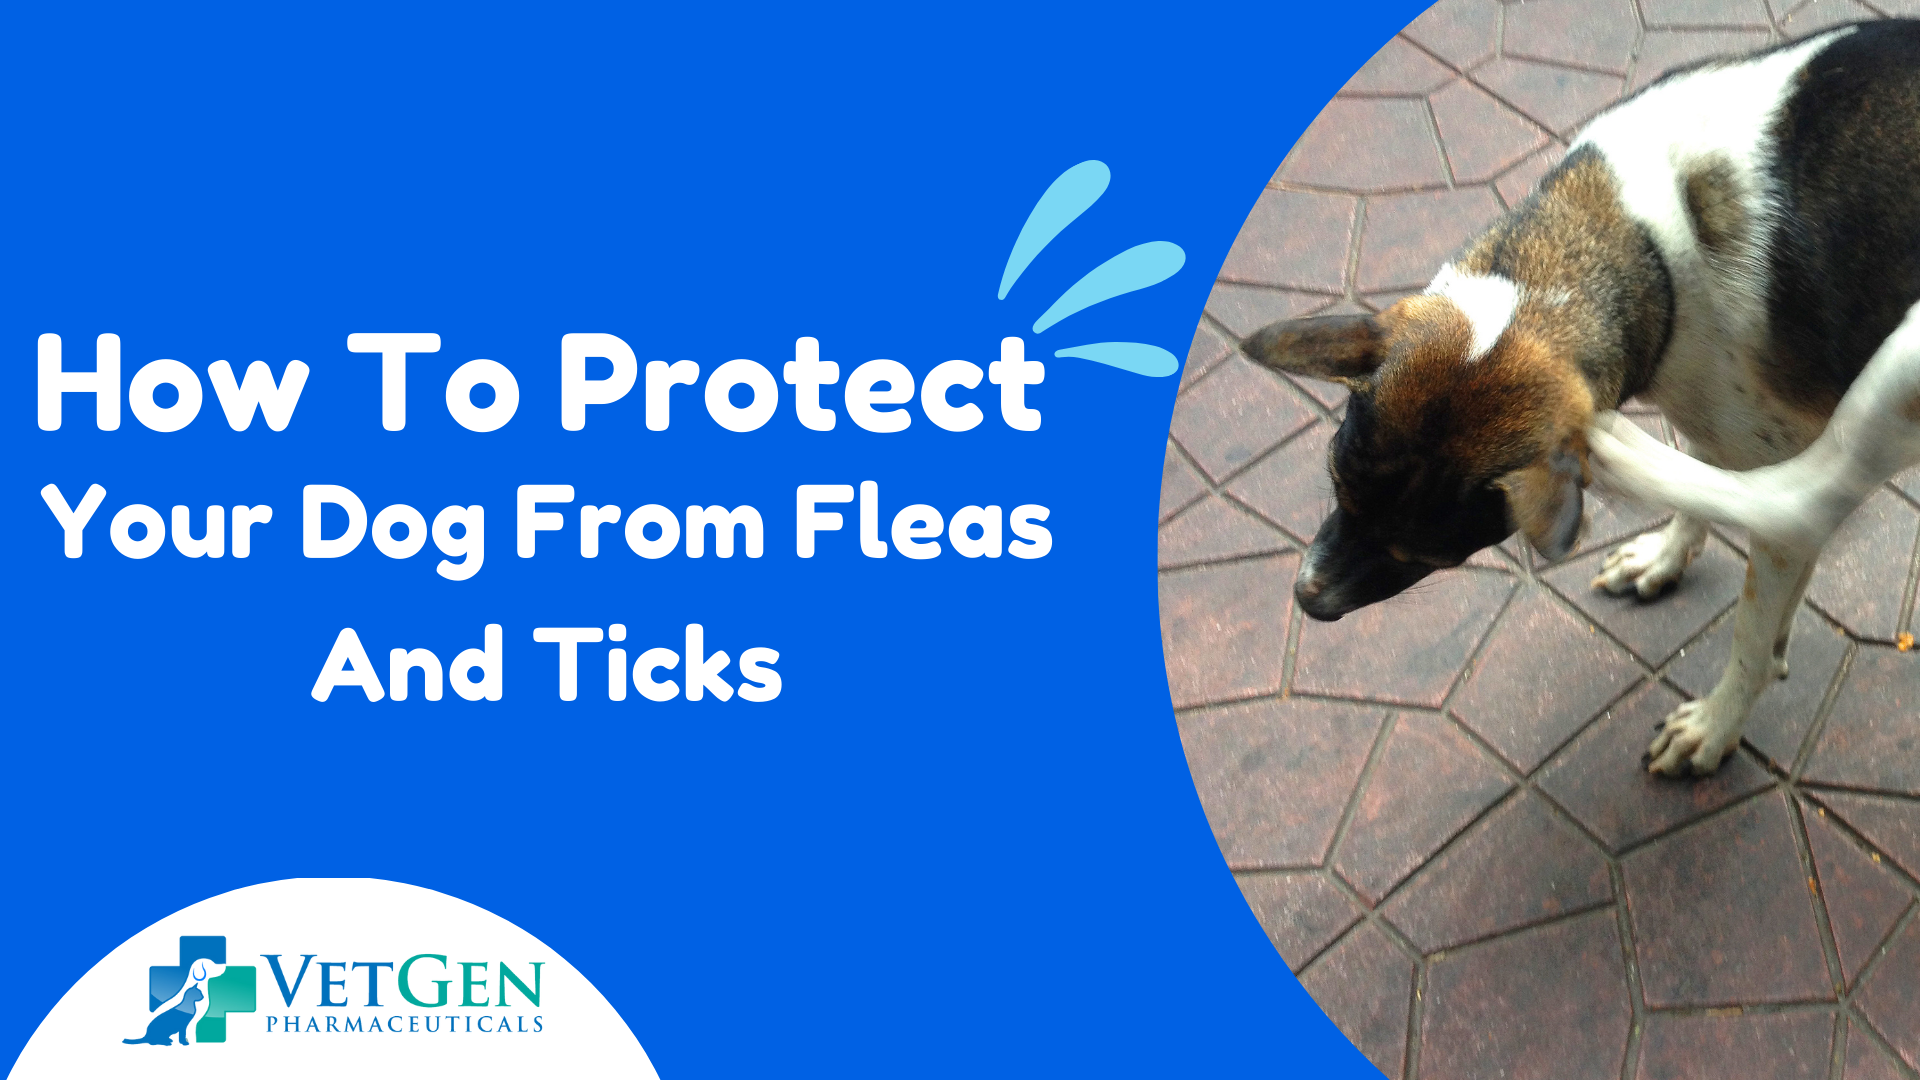 How To Protect Your Dog From Fleas And Ticks